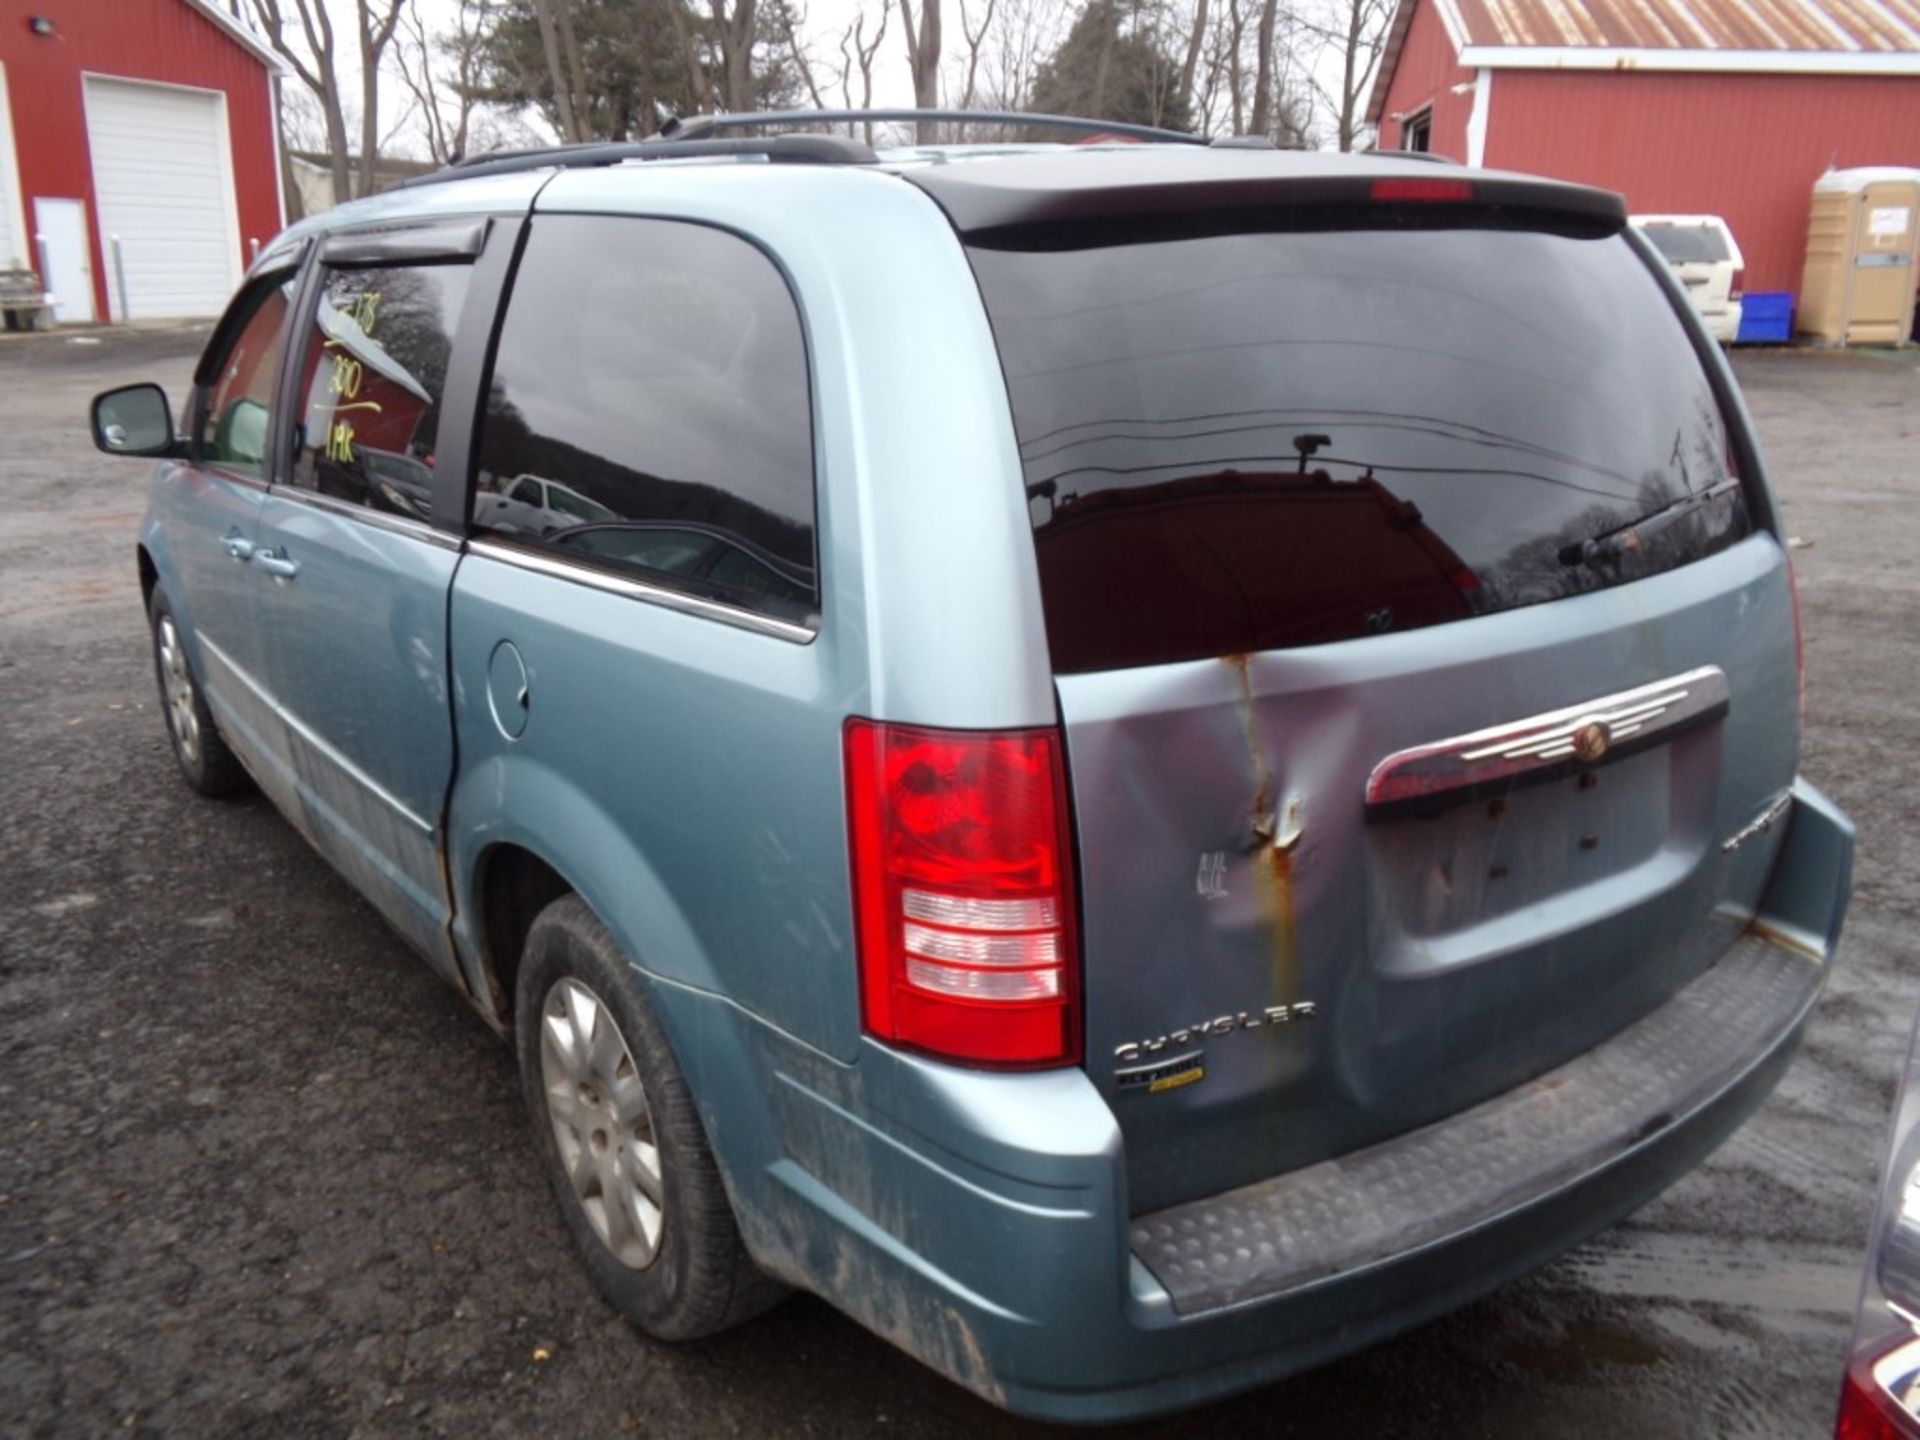 2010 Chrysler Town Country LX, Stow & Go Seating, Rear DVD, Blue, 119,559 Mi, Vin# 2A4RR4DE3AR105272 - Image 2 of 6